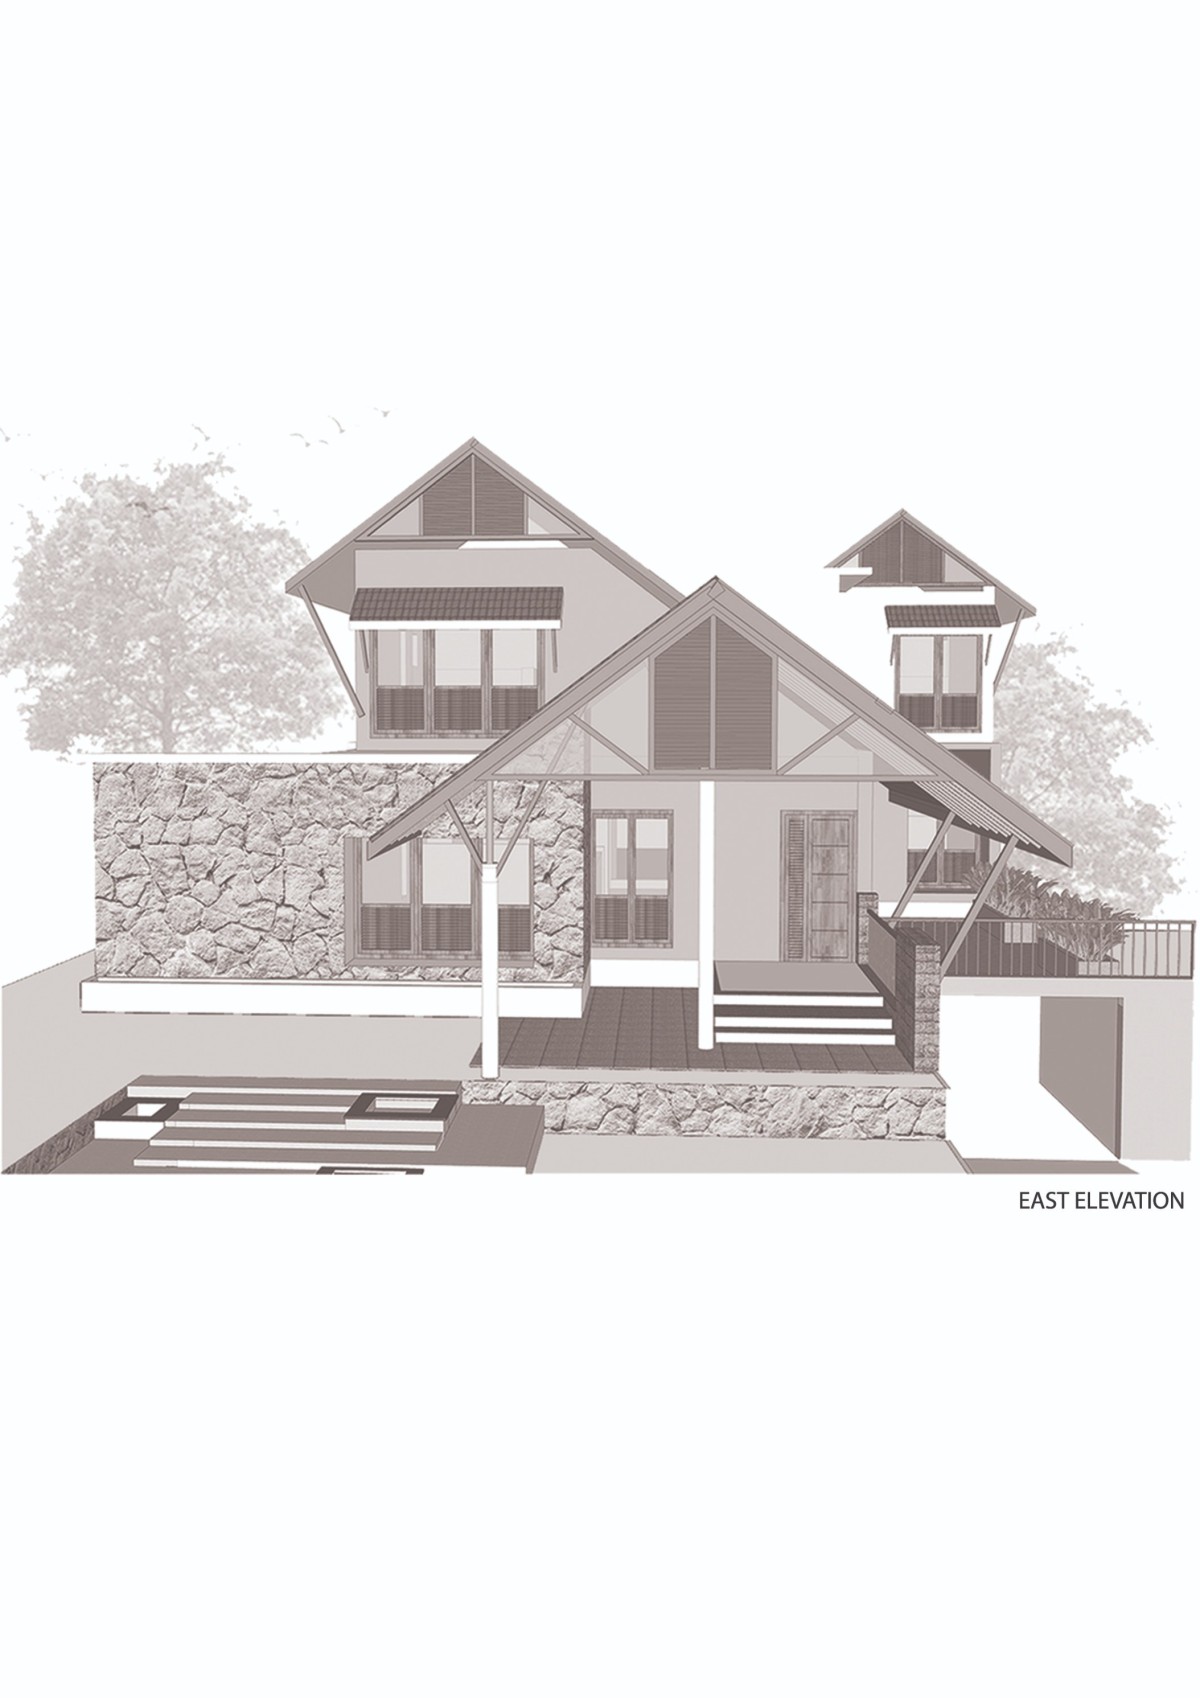 East Elevation of The Levelscape by Nestcraft Architecture